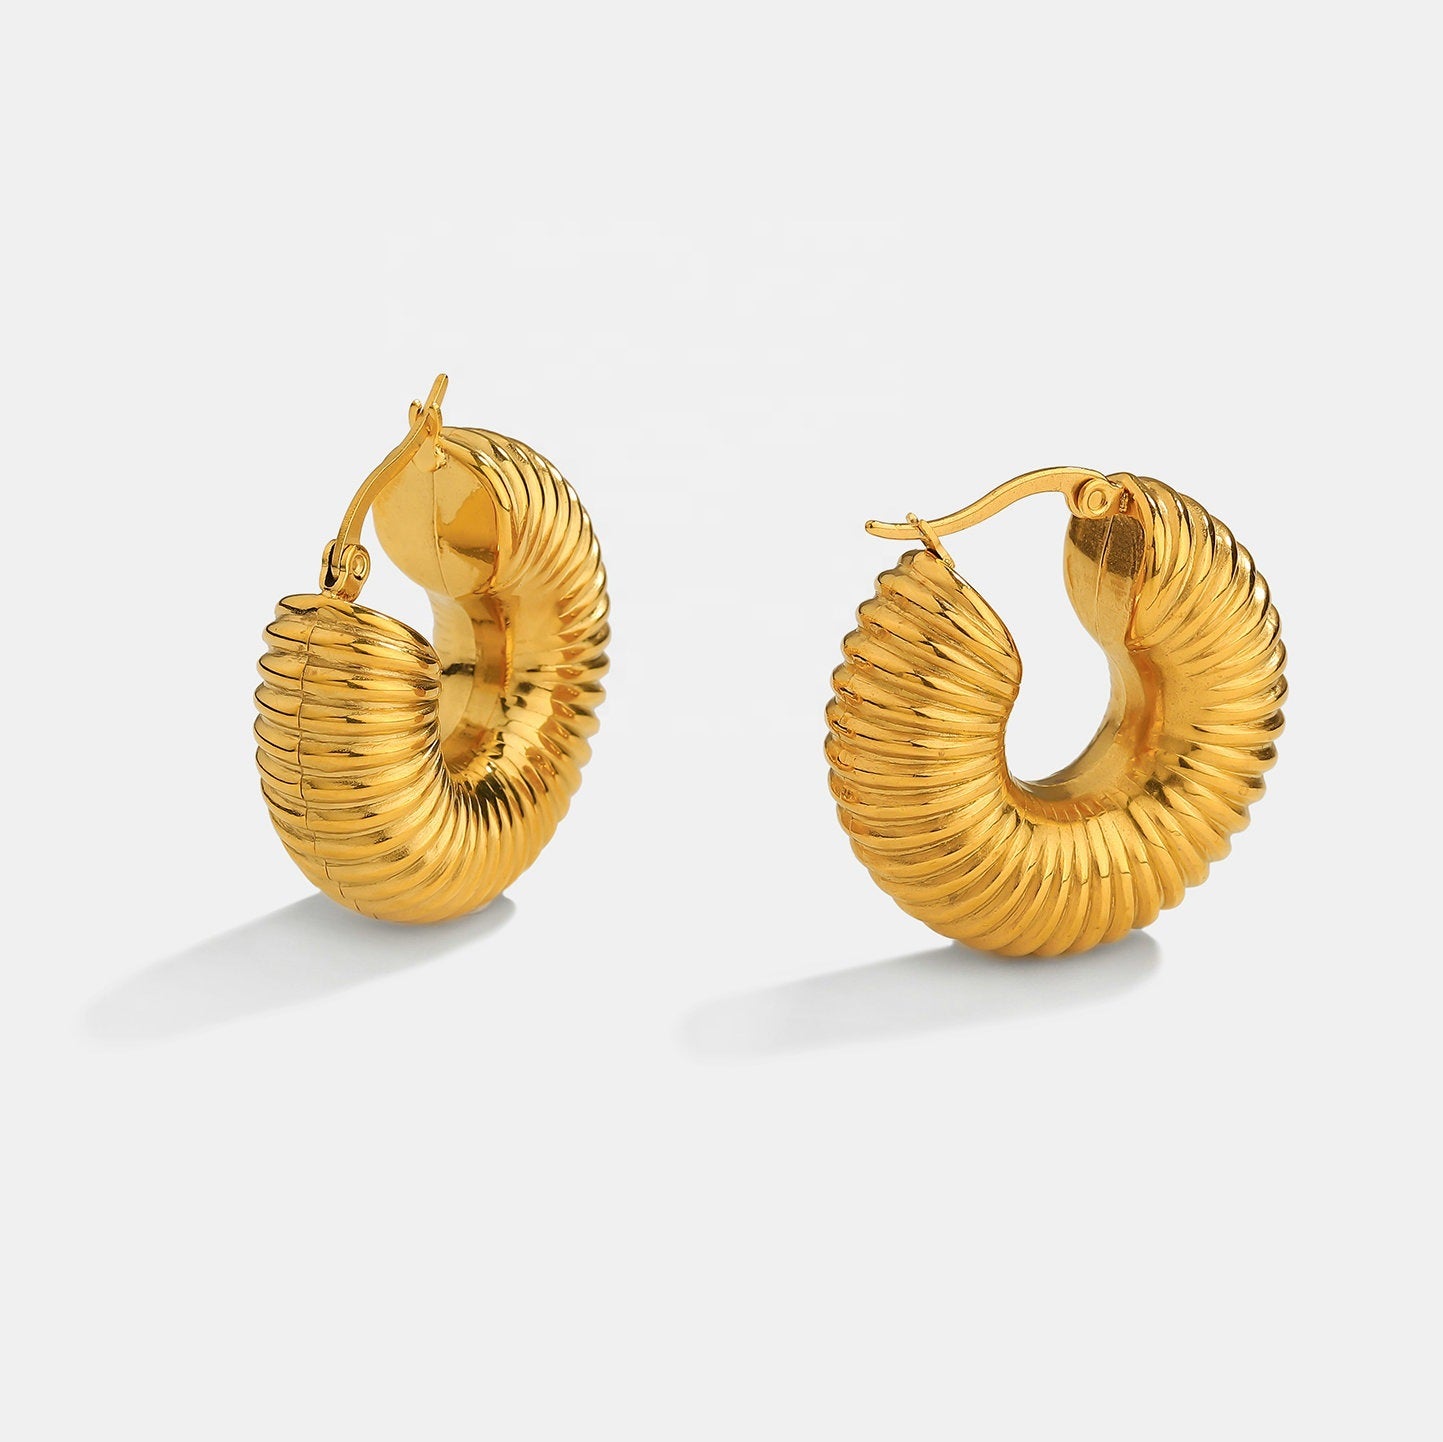 Lovely and Fashionable 18K Gold Hoop Earrings - Camili Bel Creations Gift Shop